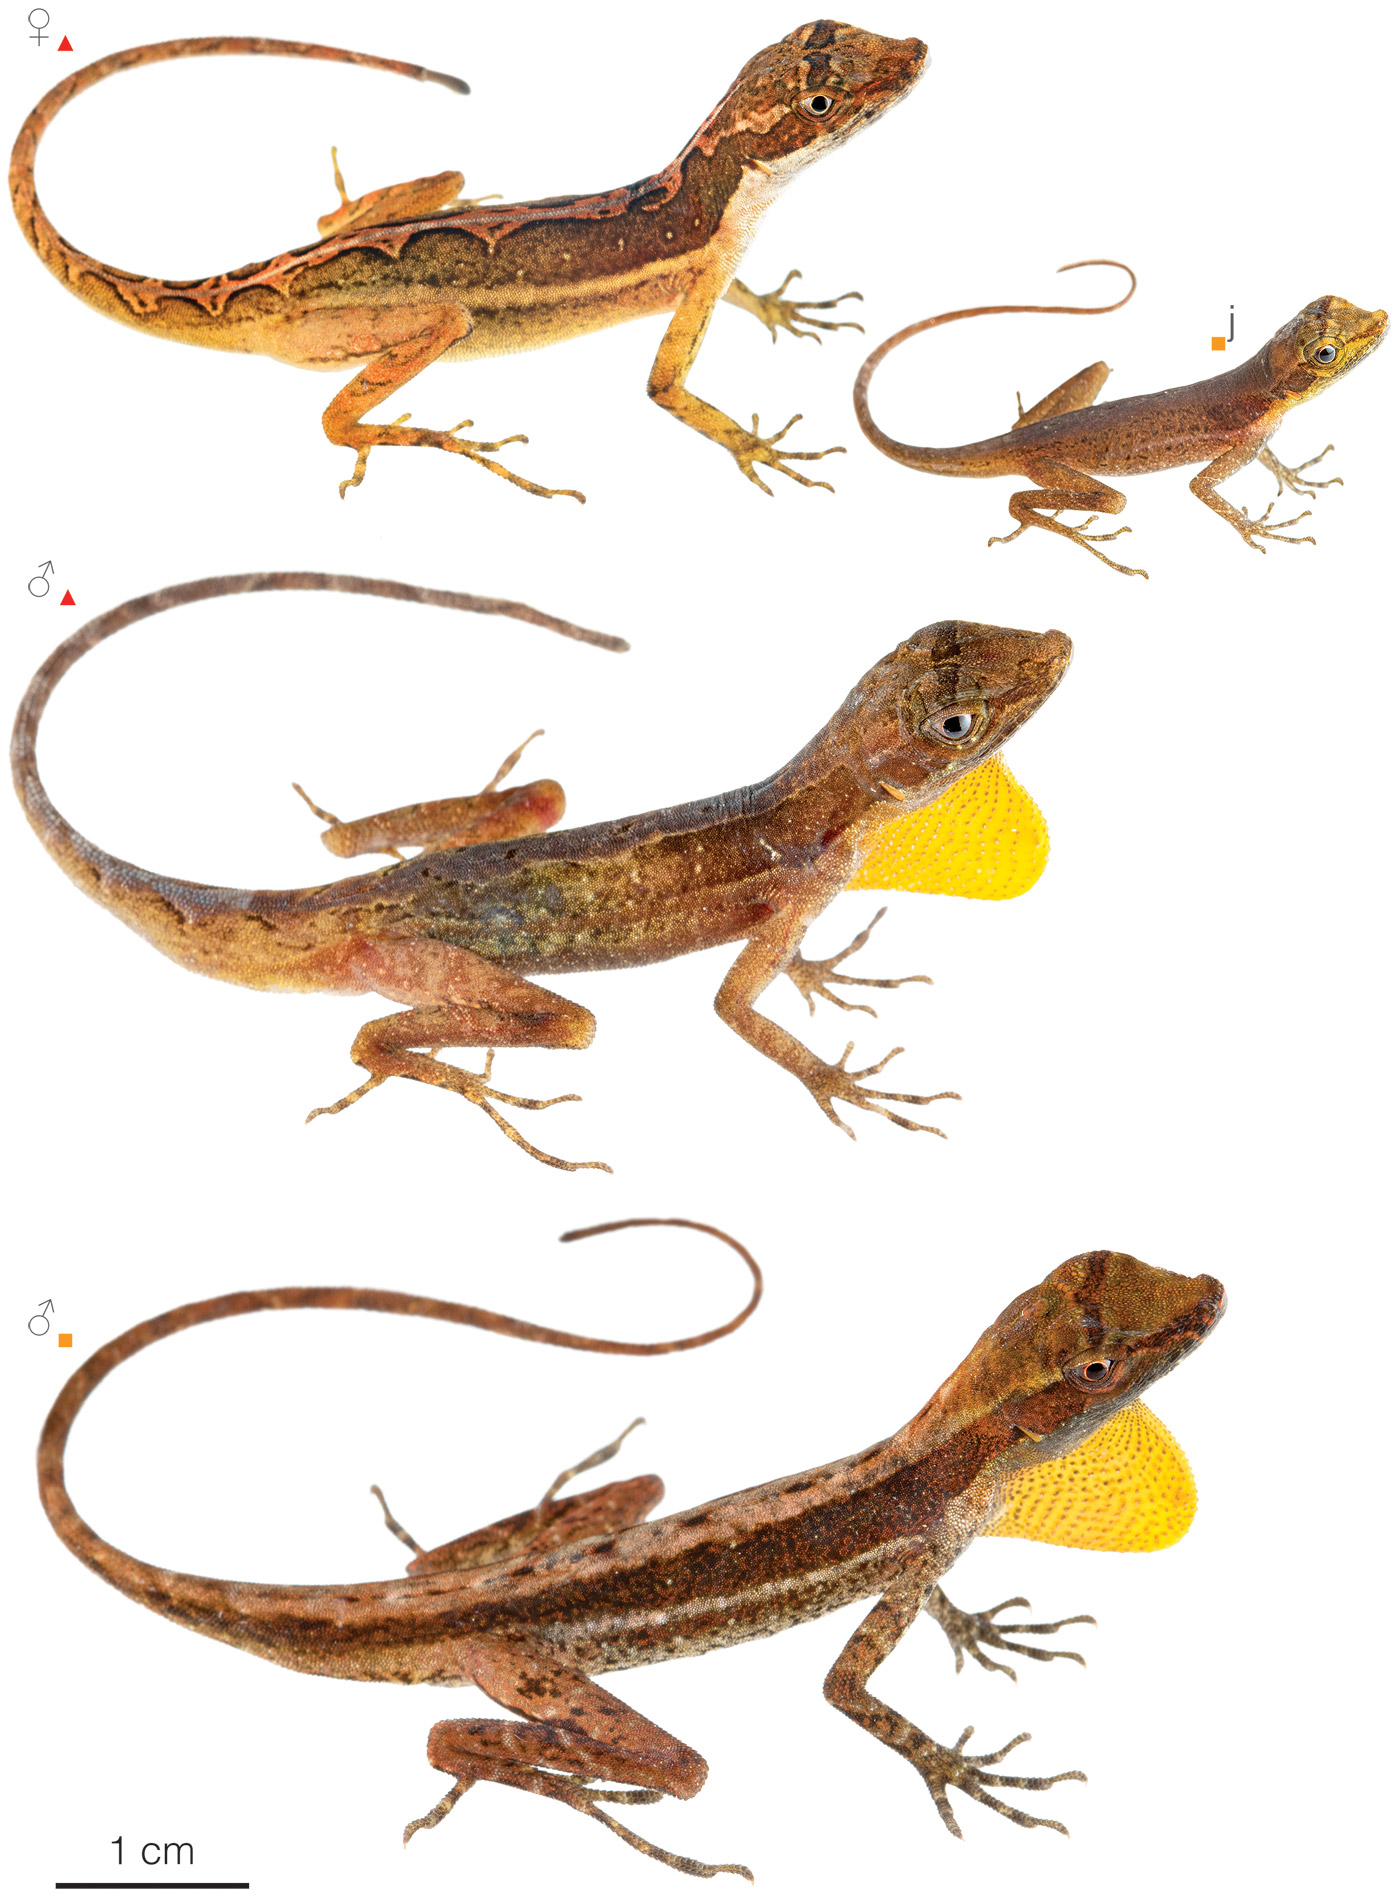 Figure showing variation among individuals of Anolis granuliceps